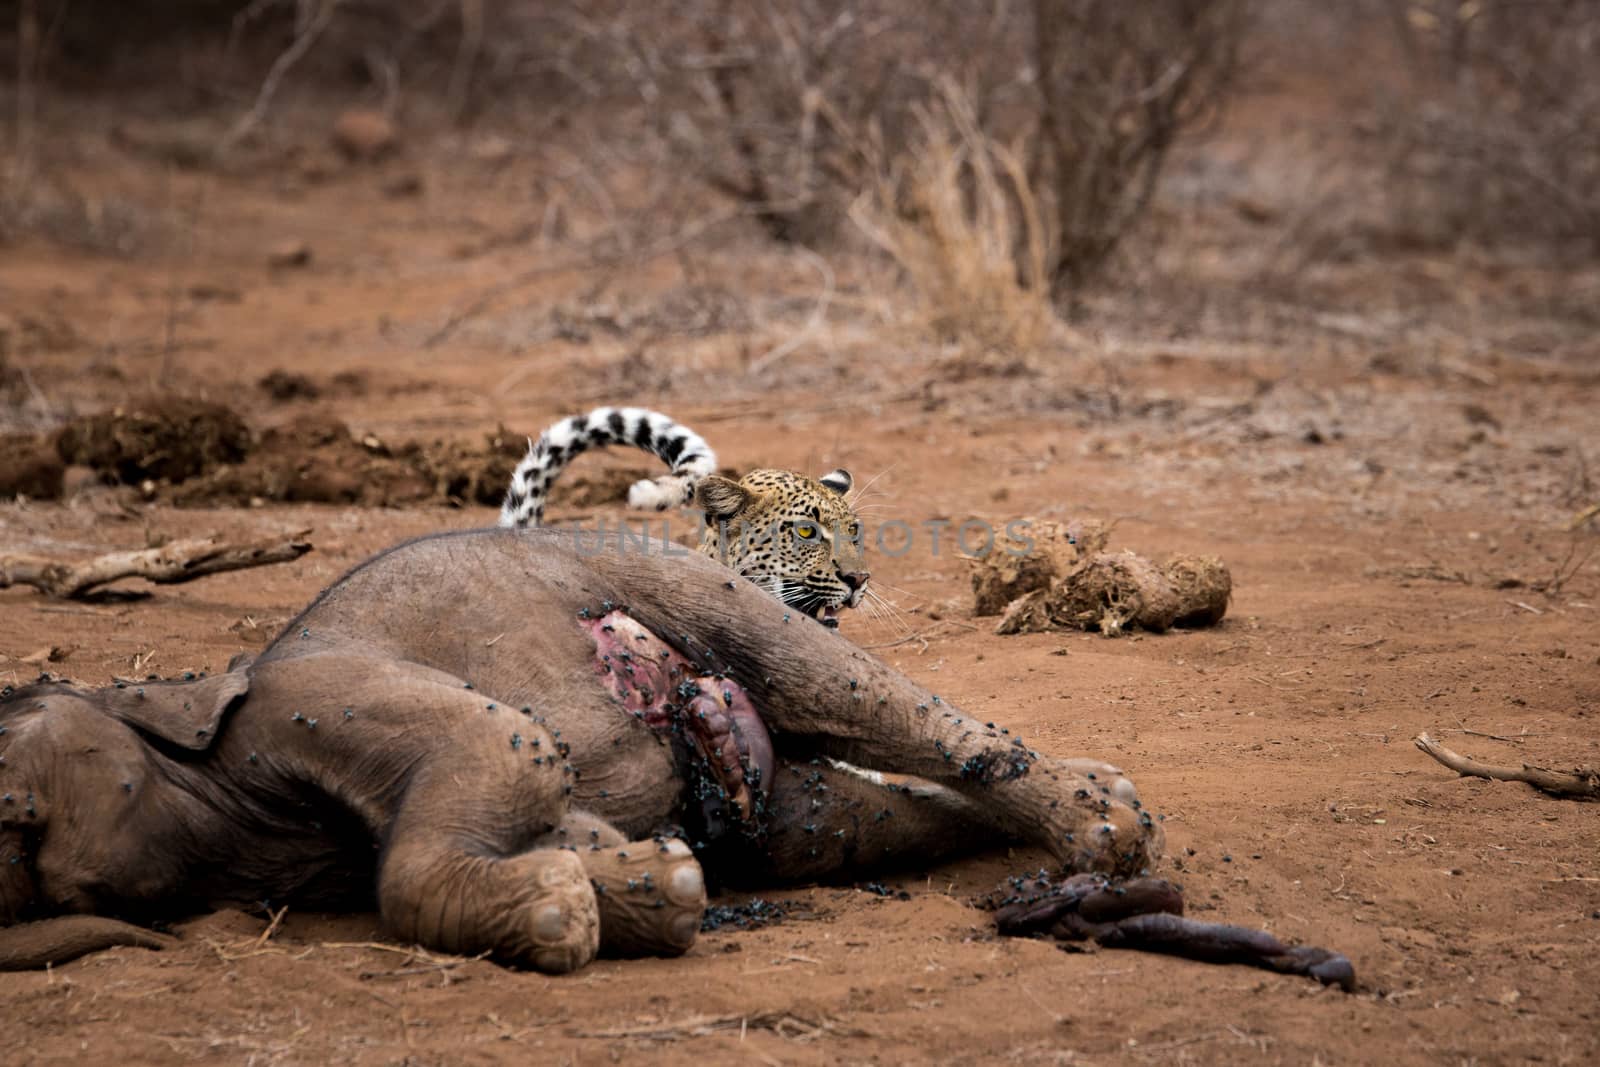 Leopard hiding behind a baby Elephant carcass in the Kruger National Park, South Africa.